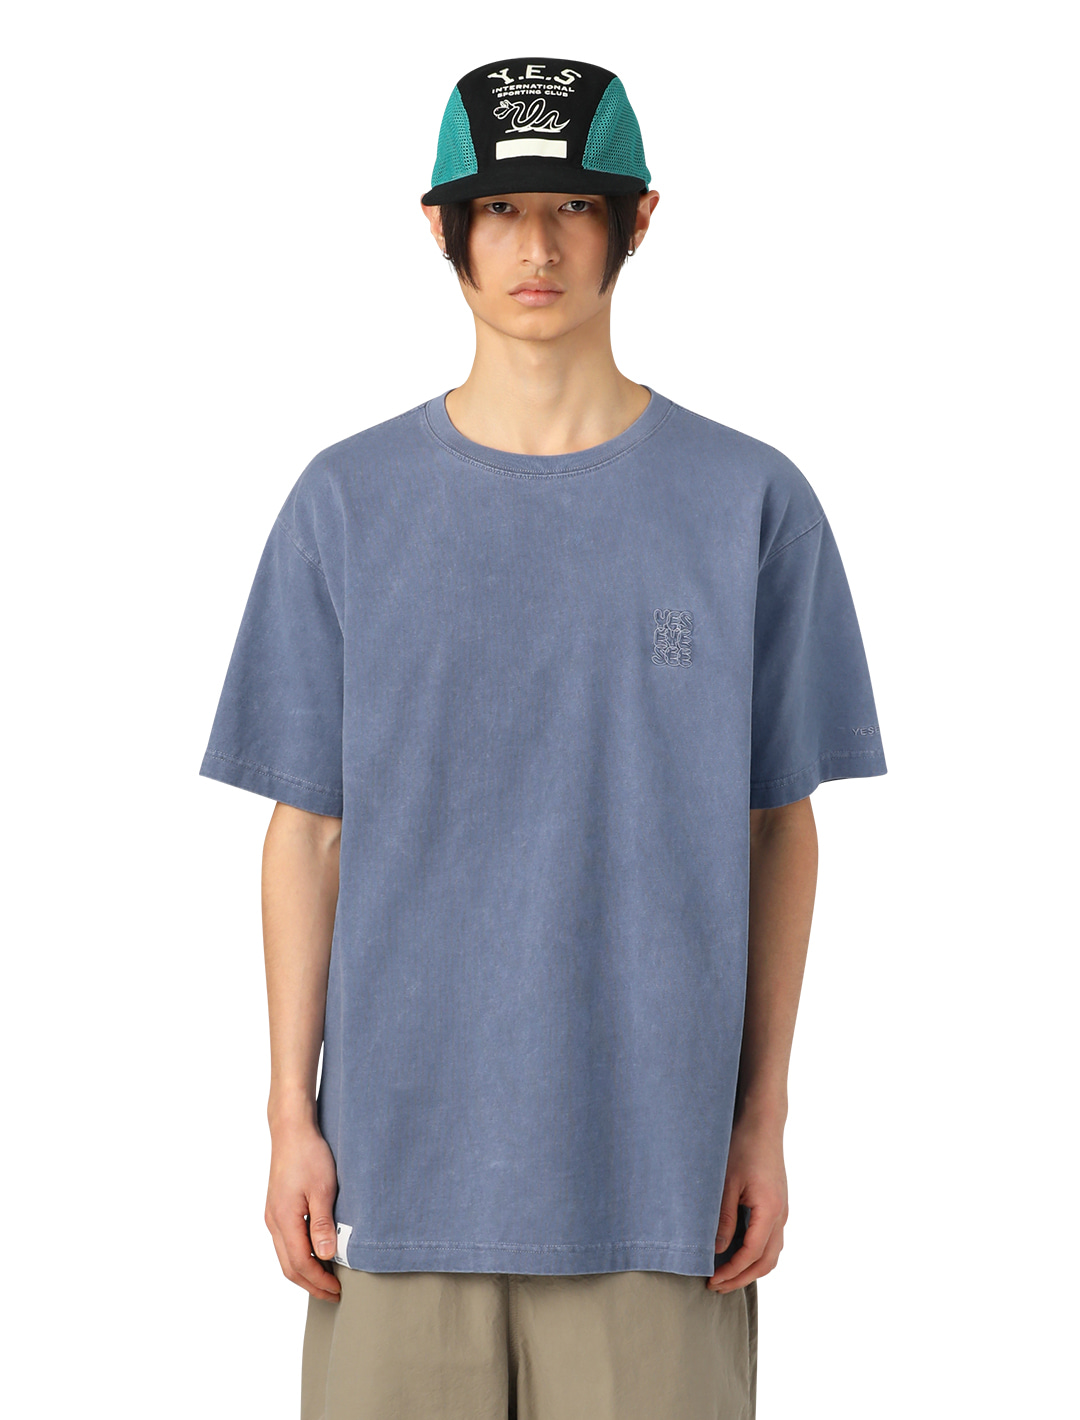 Y.E.S Pig Dyed Tee Navy